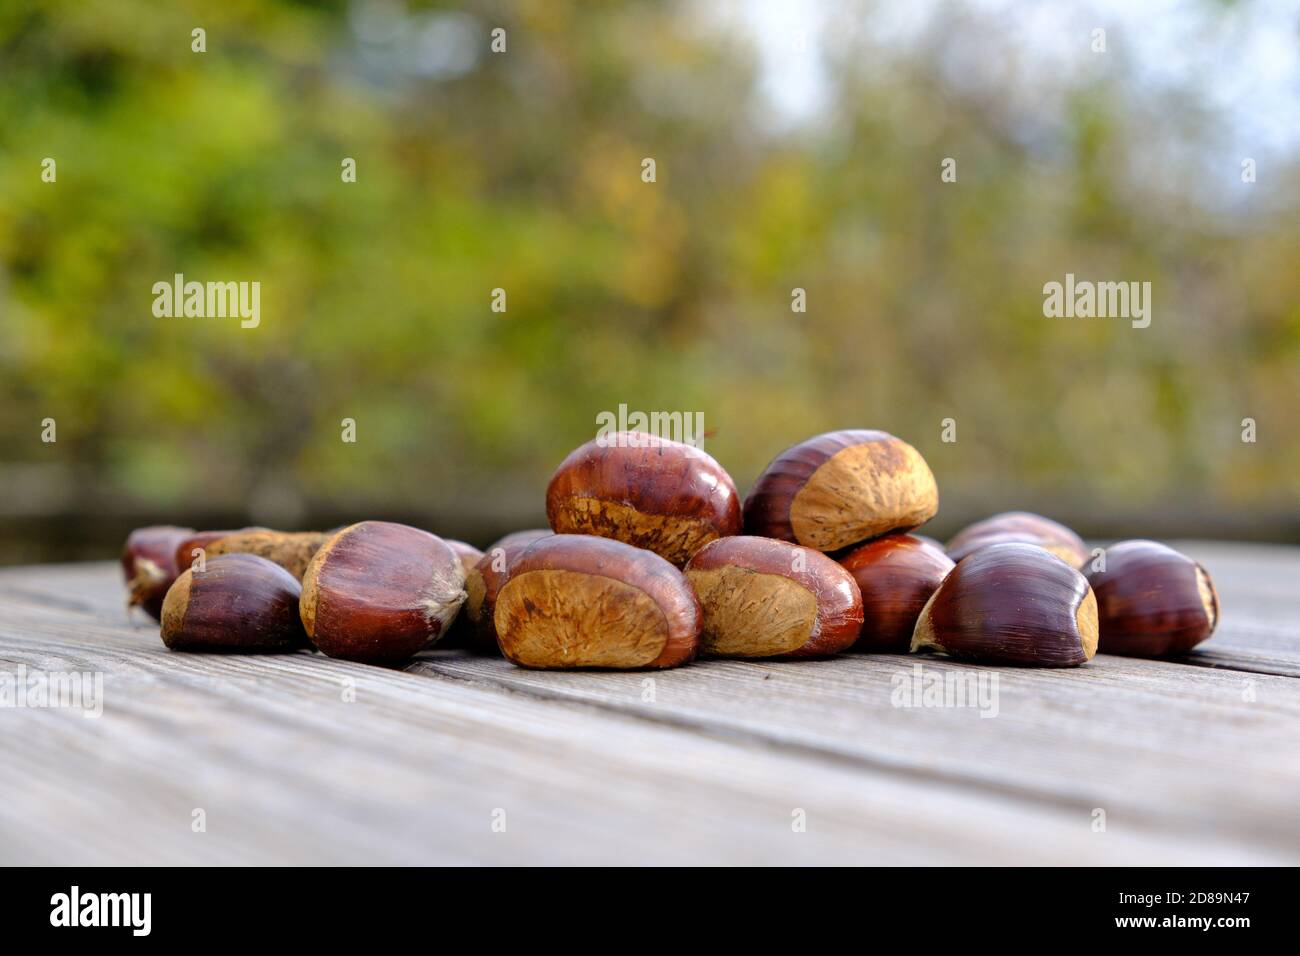 Chestnuts on a wooden table outdoor Stock Photo